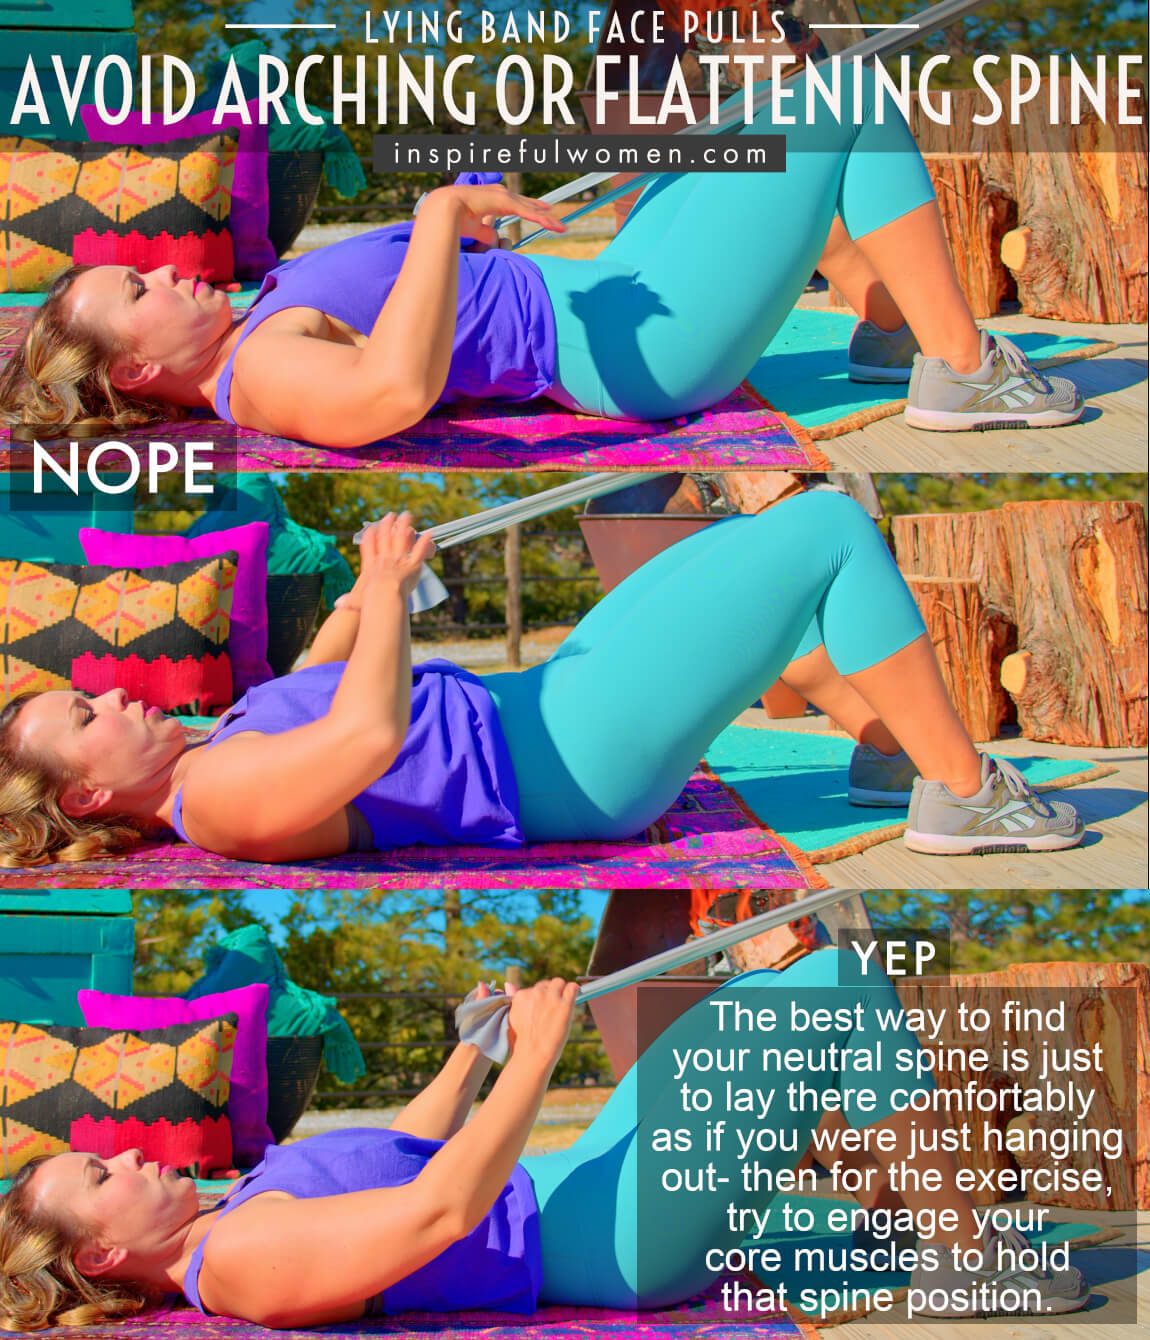 avoid-arching-or-flattening-spine-lying-banded-face-pulls-rear-delt-exercise-proper-form